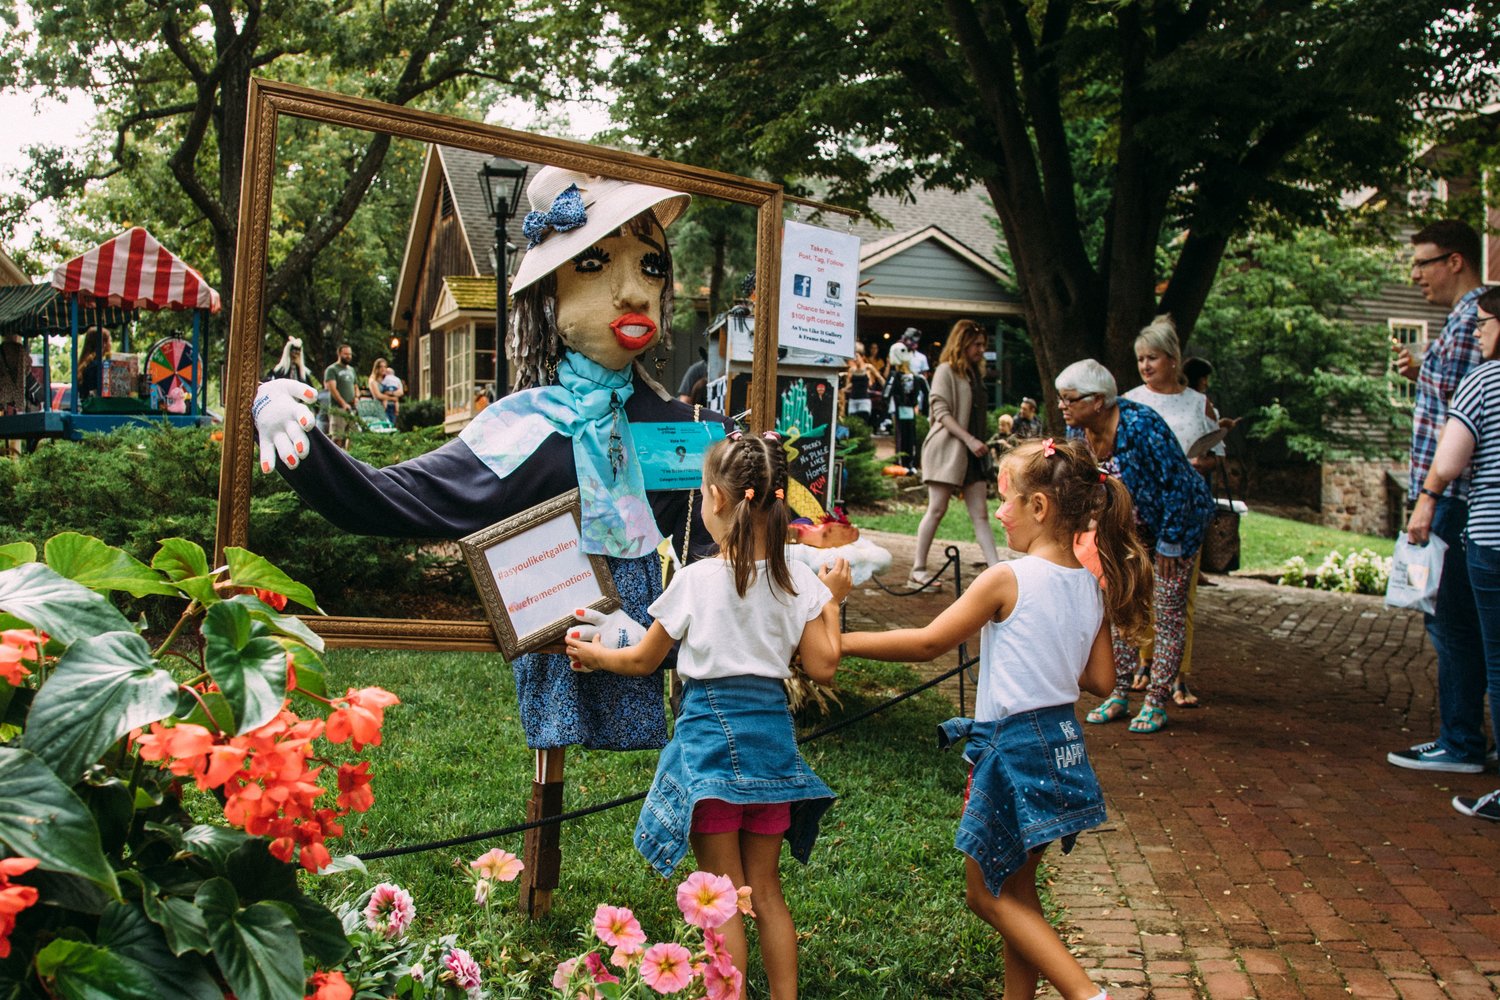 Visitors take a look at the scarecrows lining the paths at Peddler’s Village.